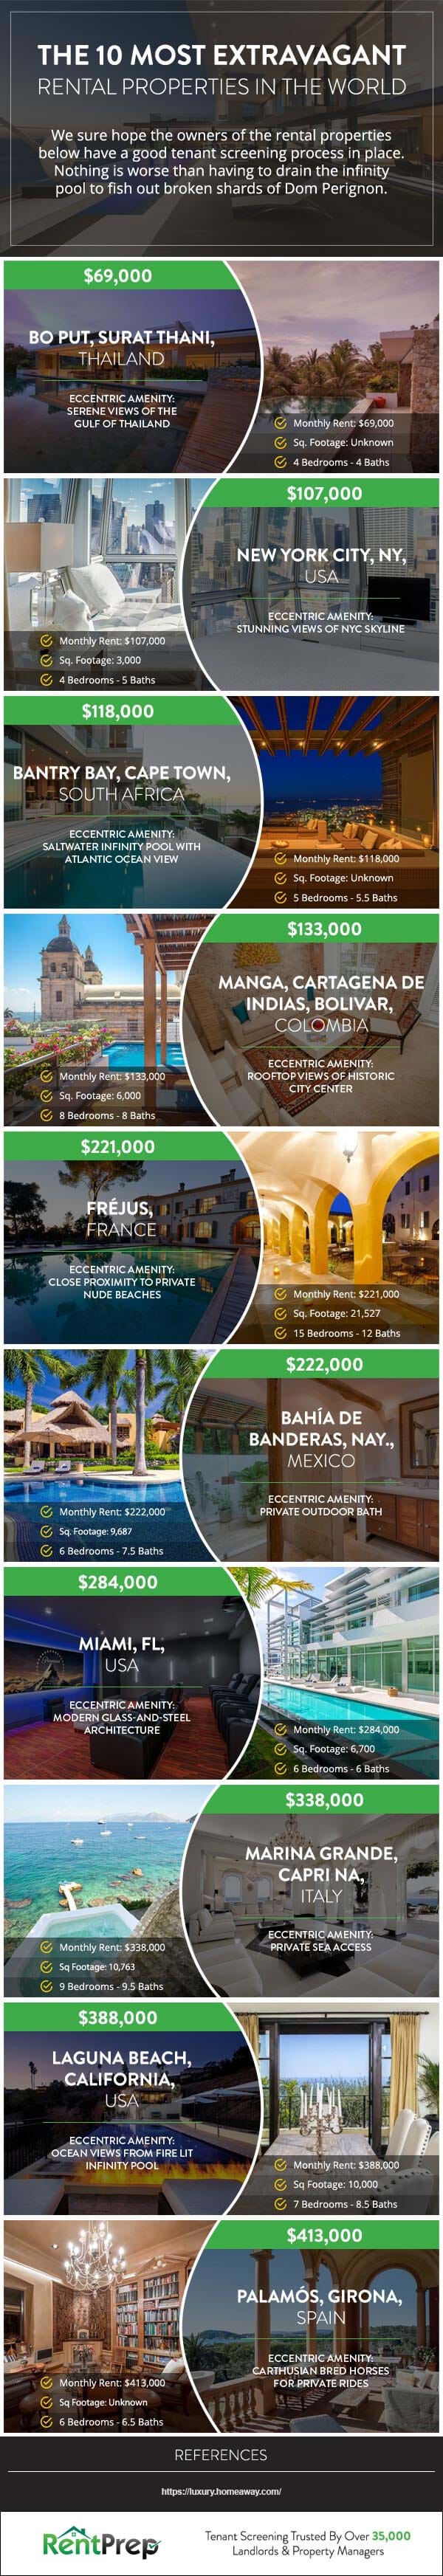 10 Most Extravagant Rental Properties In The World